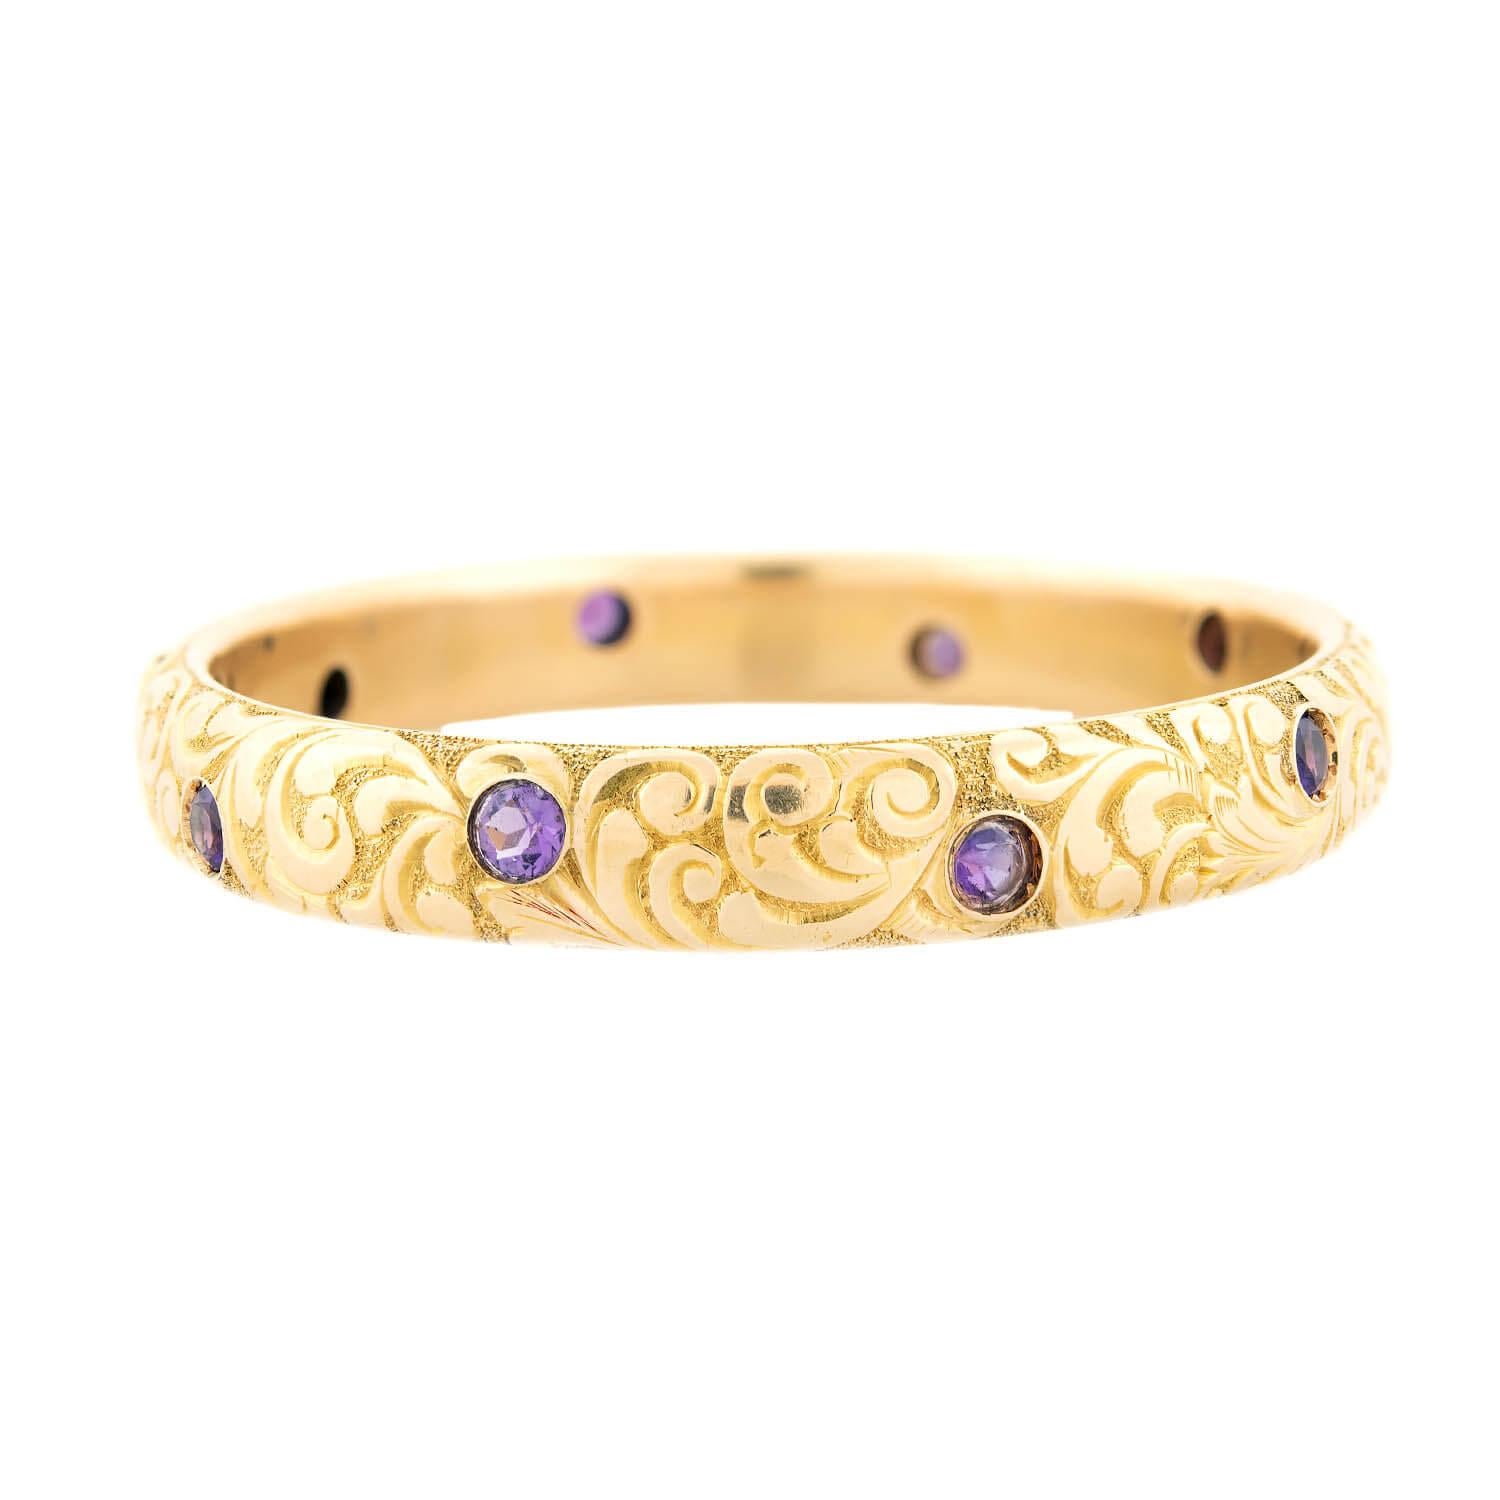 A beautiful gold and amethyst bangle bracelet from the Art Nouveau (ca1900) period! This stunning 14kt gold bracelet features a carved scrolling design that carries around the entire outer surface of the bracelet, adding wonderful texture and depth.